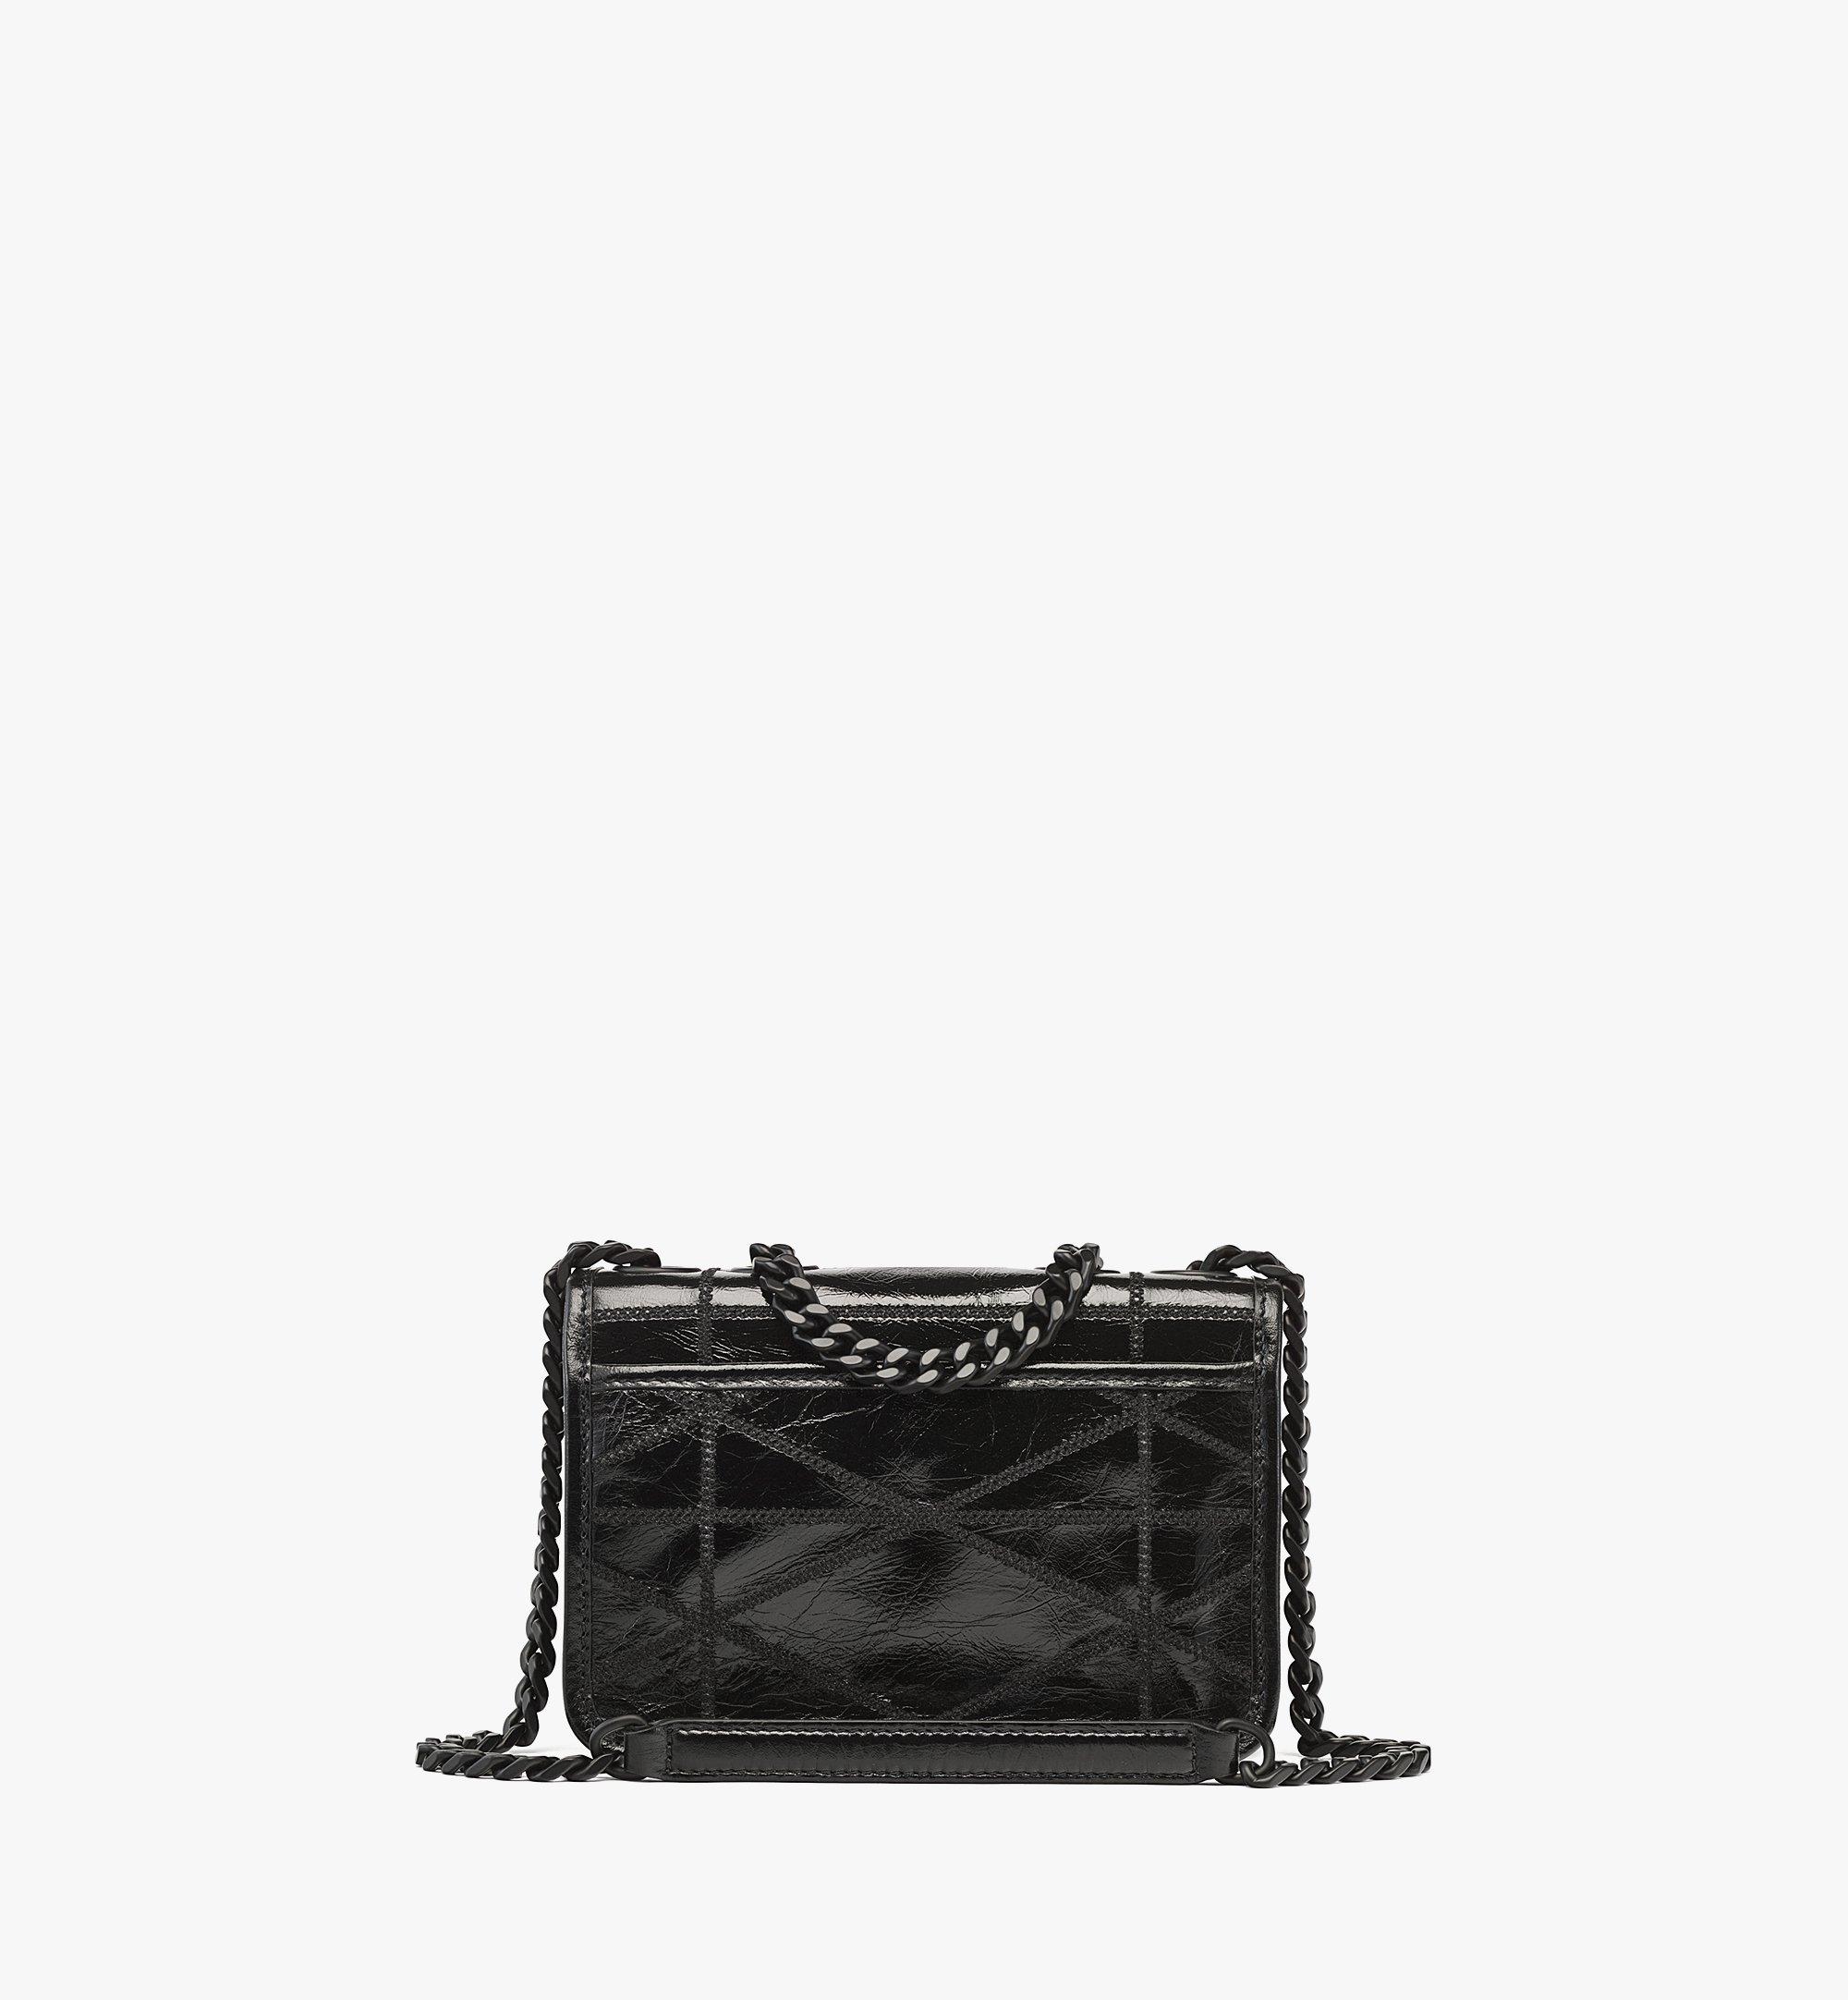 Mcm Travia Quilted Shoulder Bag in Crushed Leather Black Leather